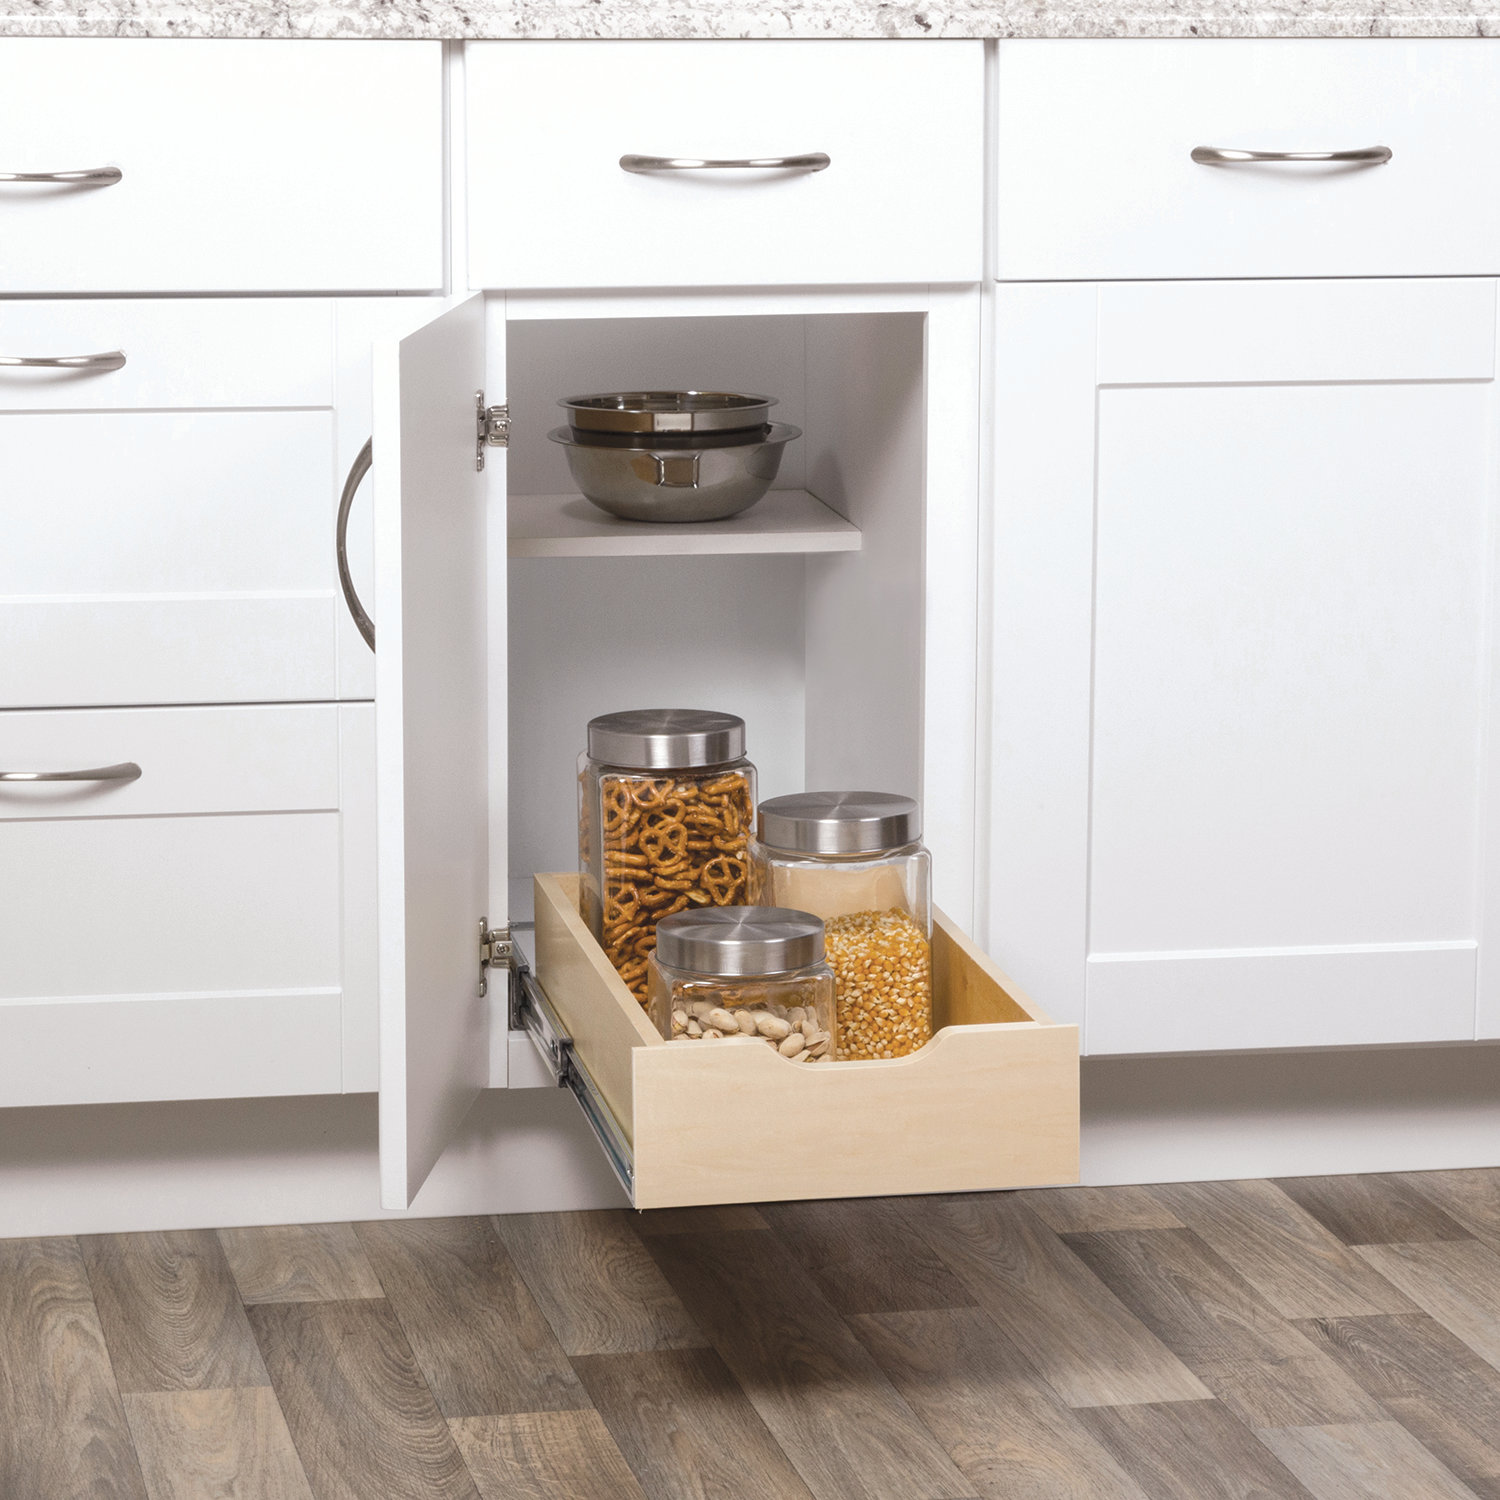 Rebrilliant Kadrie Pull Out Drawer Wayfair Canada